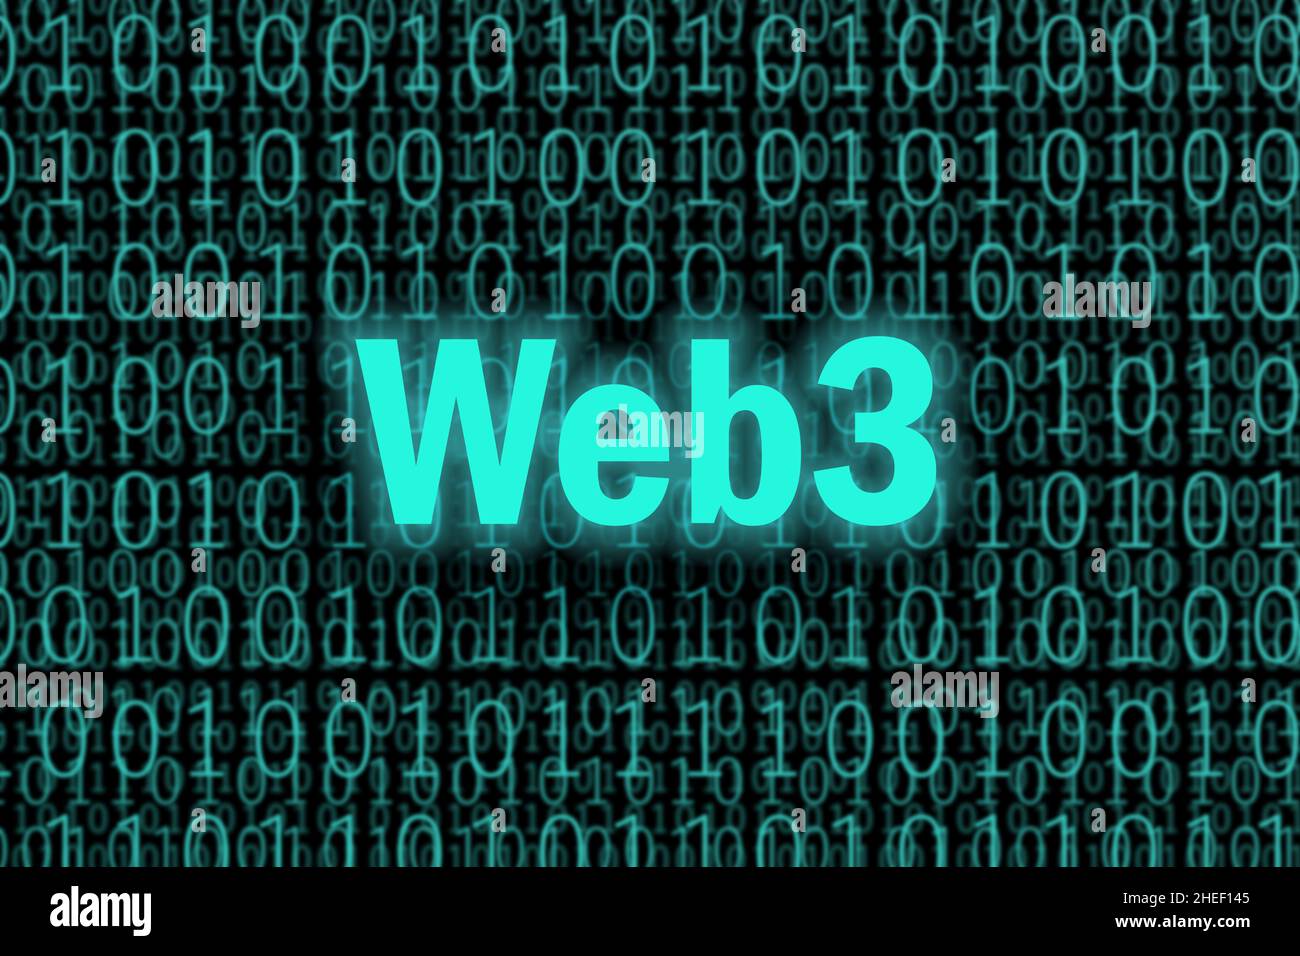 Web3 on binary numbers background. 3d illustration. Stock Photo